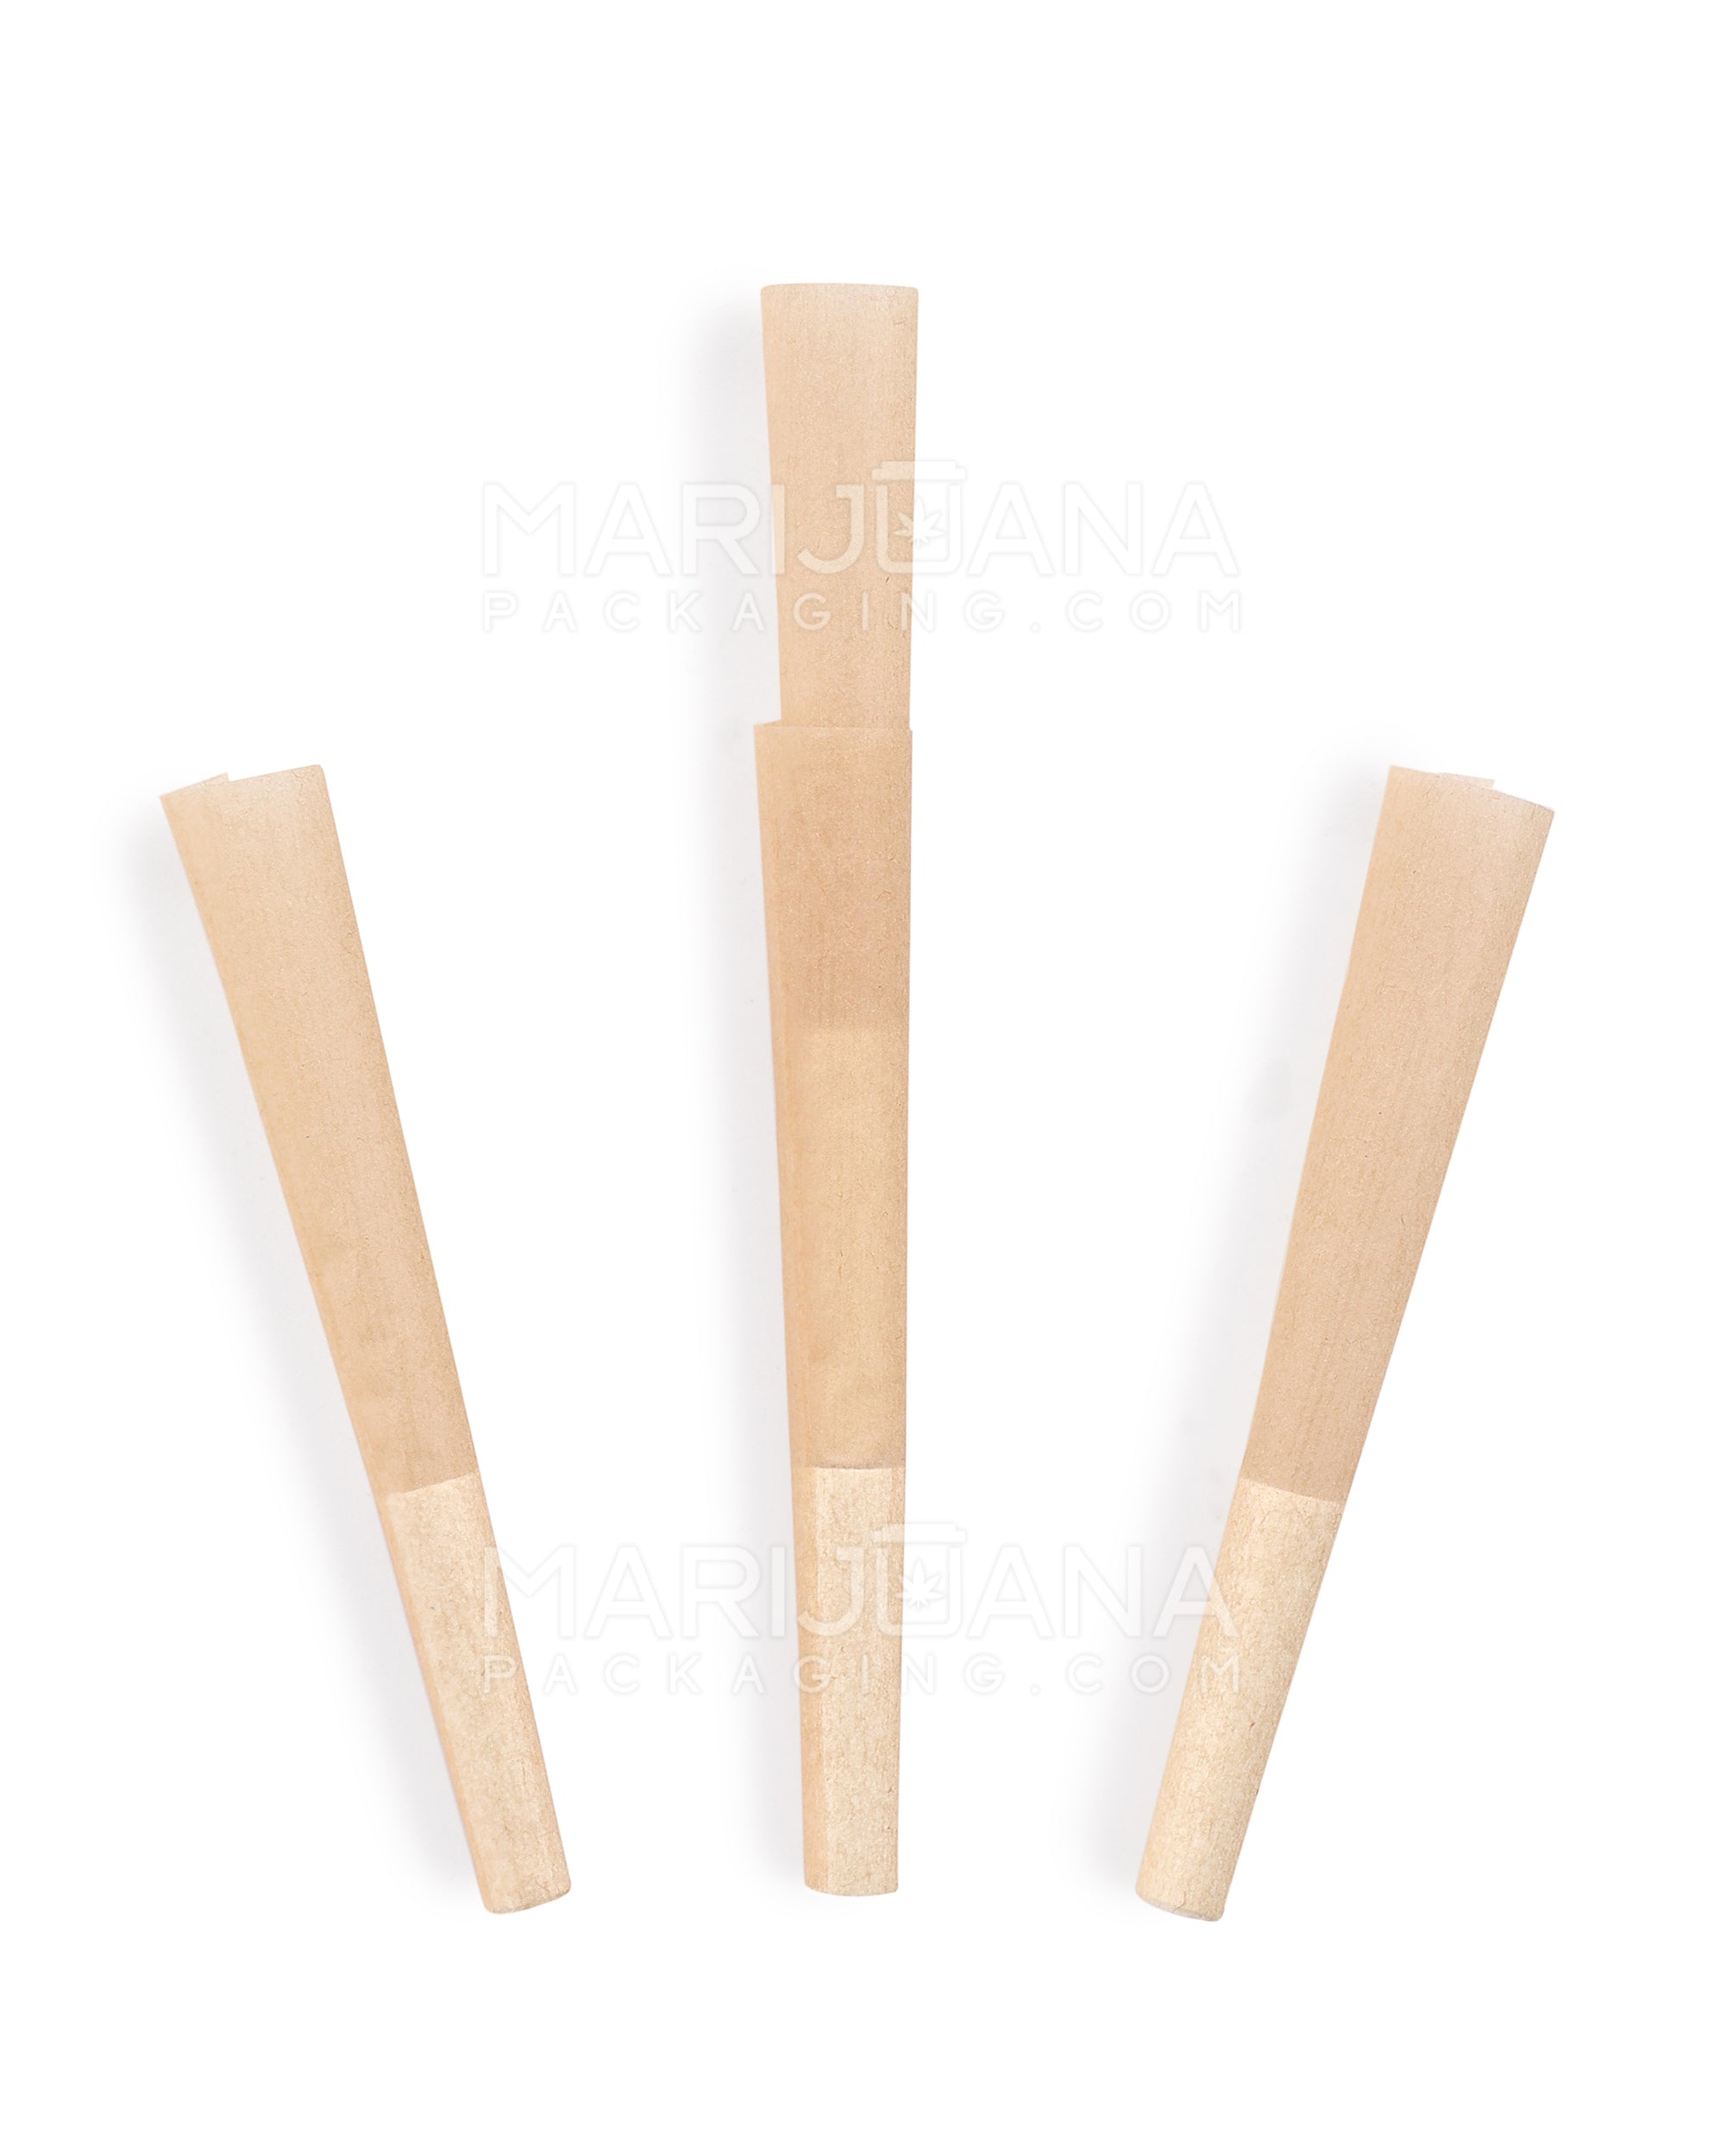 CONES | Dogwalker Size Pre Rolled Cones | 70mm - Unbleached Paper - 1000 Count